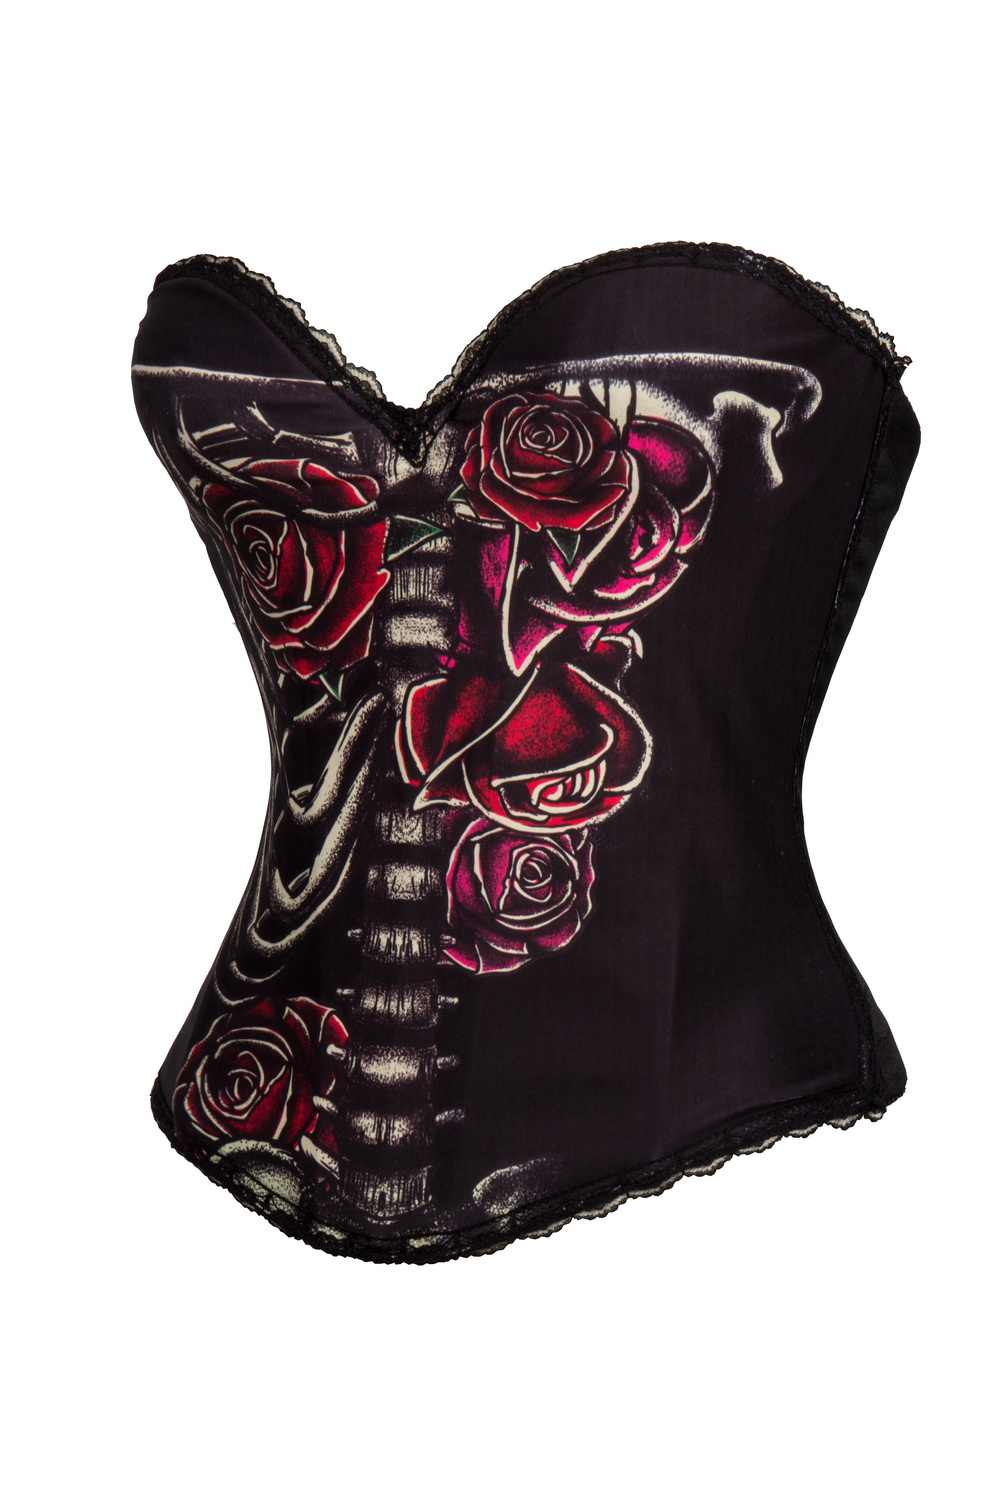 F66367 Rock Skull and Rose Steampunk Fashion Overbust Bustier Corset